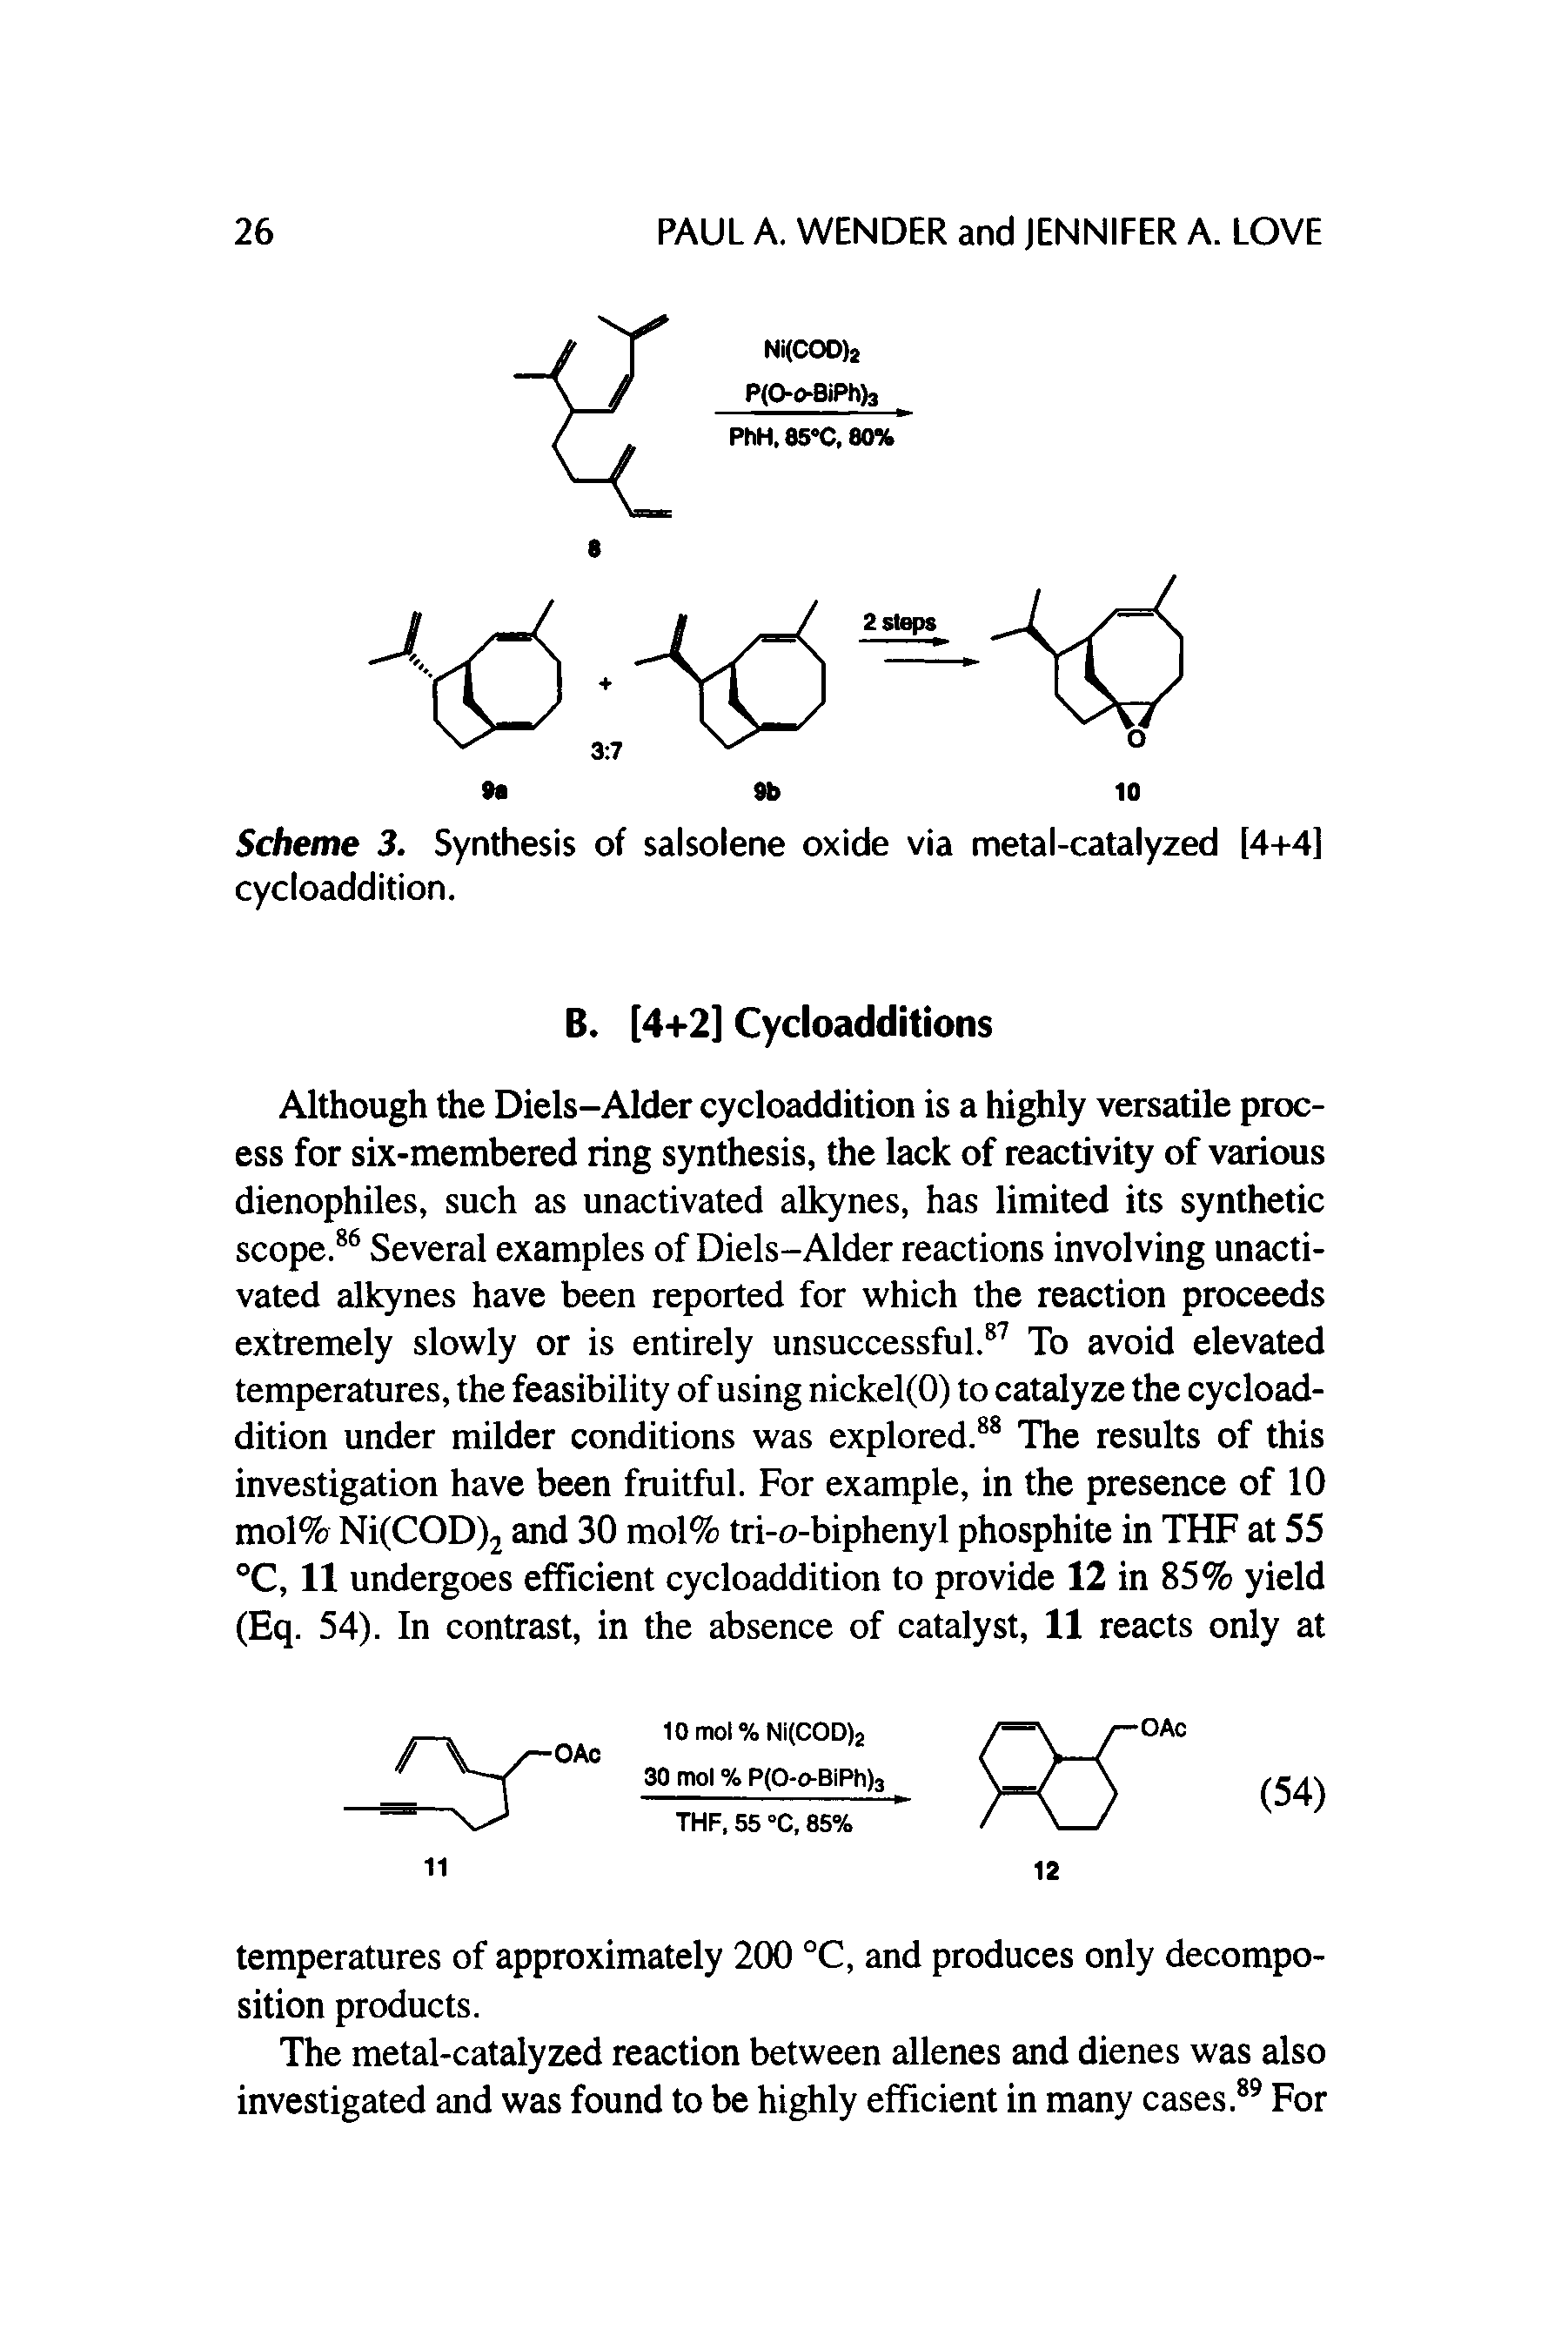 Scheme 3. Synthesis of salsolene oxide via metal-catalyzed [4+4] cycloaddition.